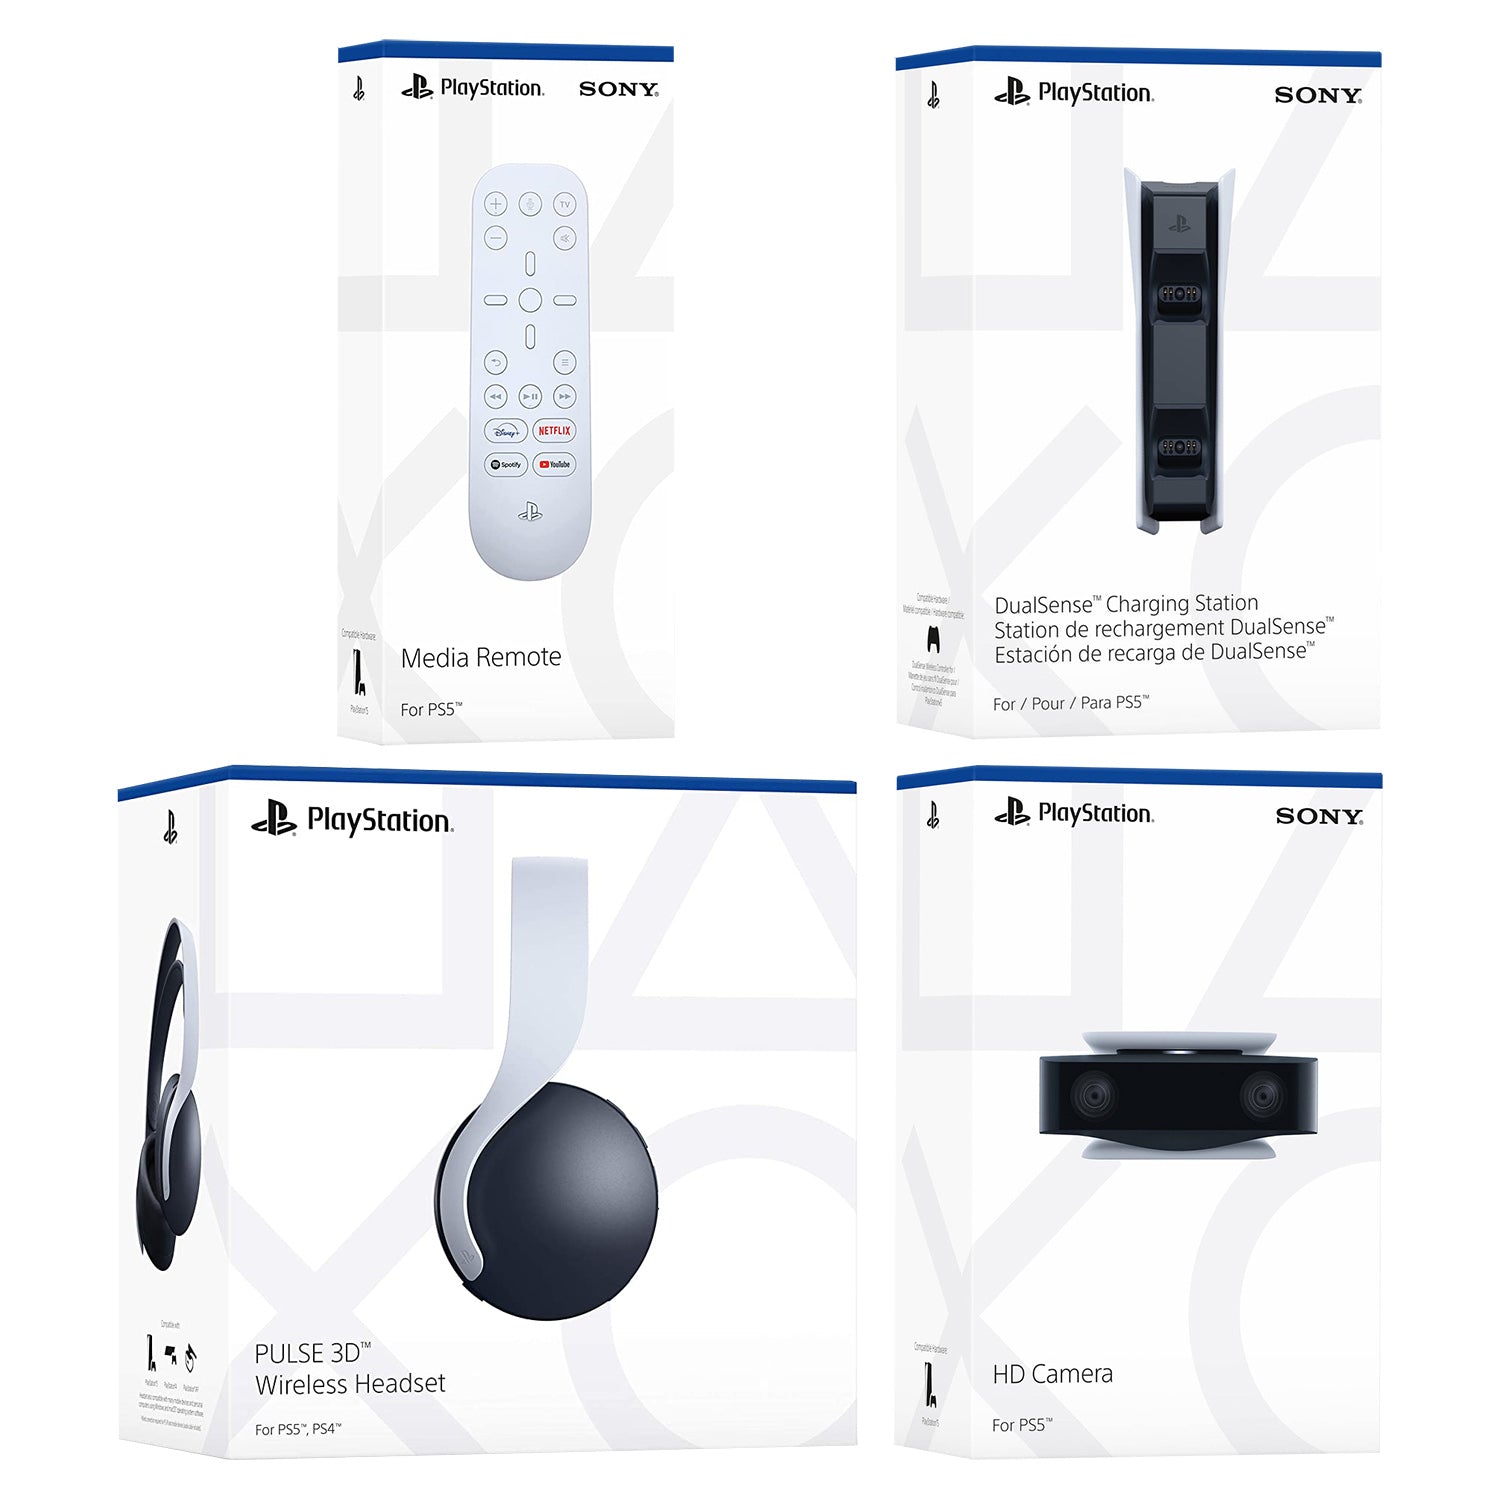 Sony PS5 Headset, Media Remote, Charging Station and Camera Playstation 5 Bundle - Pro-Distributing